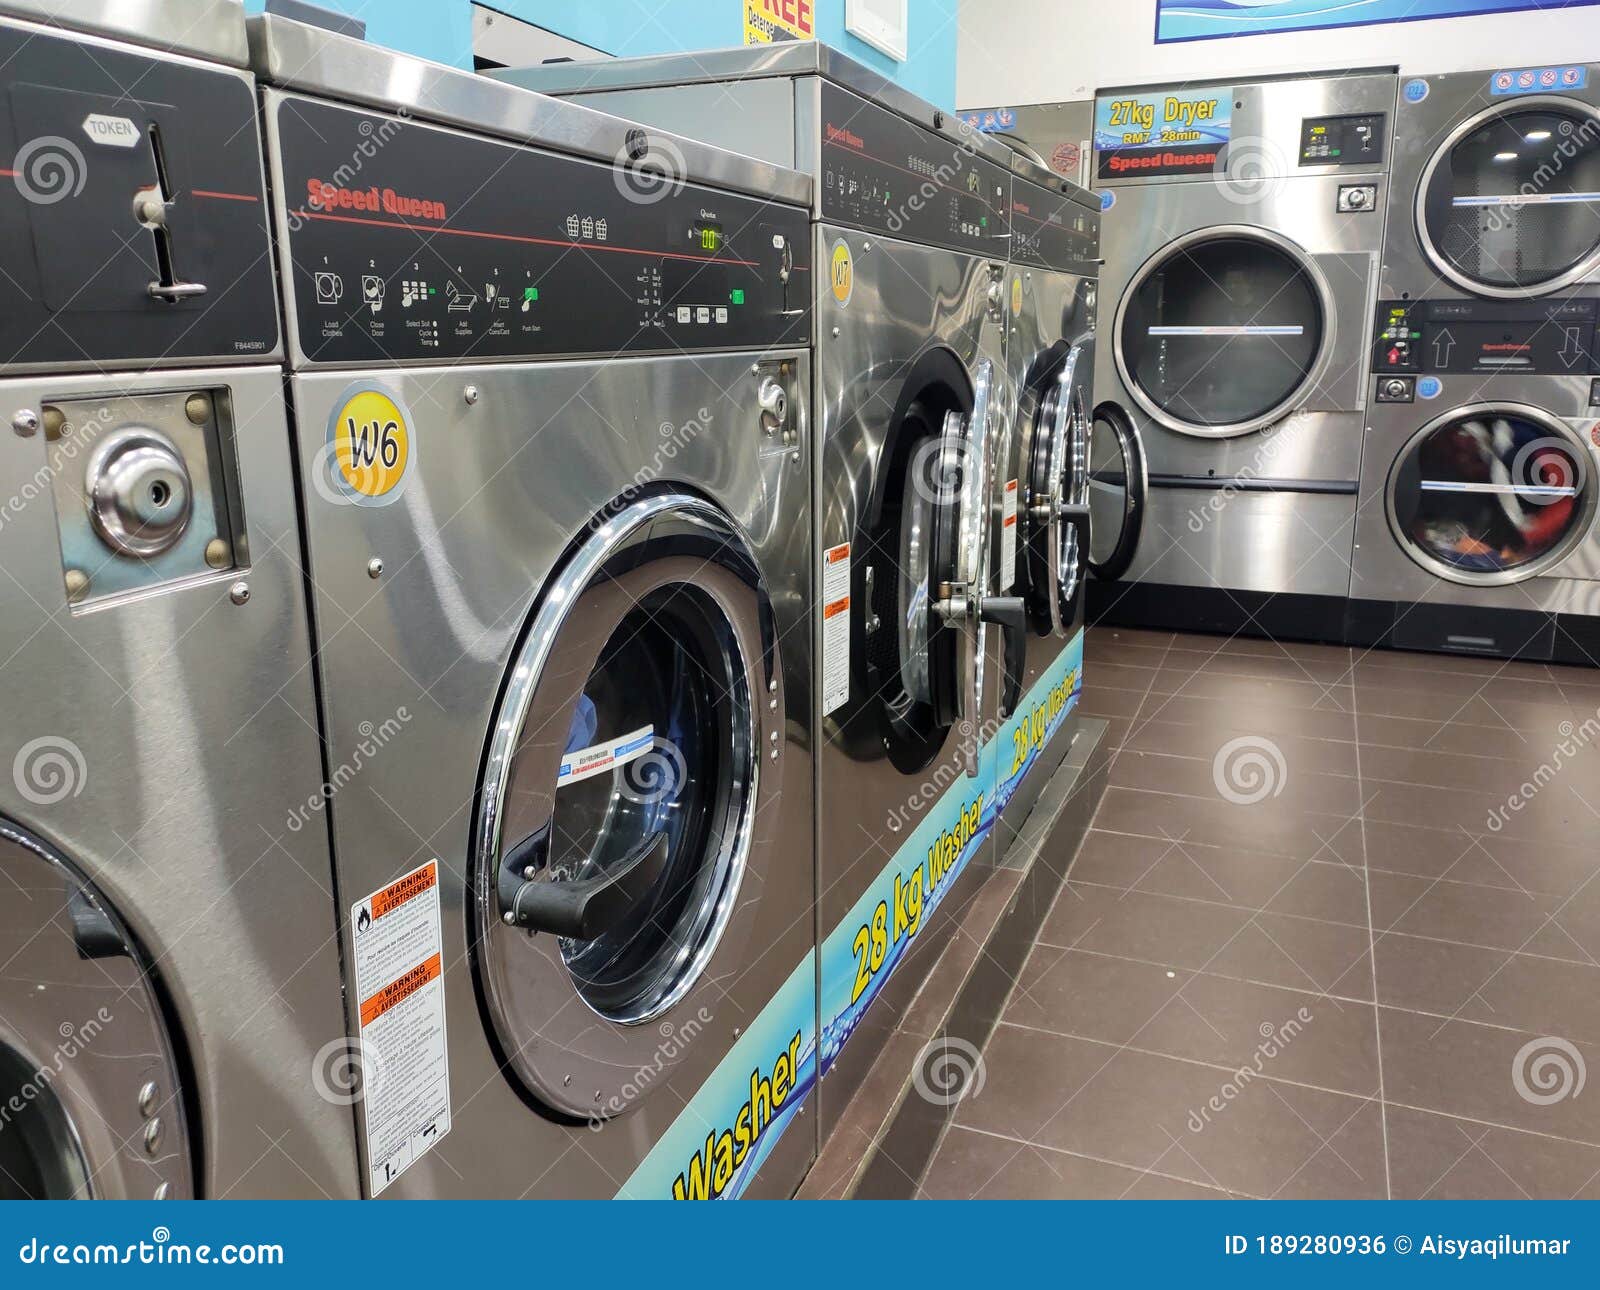 laundry-machines-outlet-provides-self-service-drying-open-hours-kuala-lumpur-malaysia-march-189280936.jpg